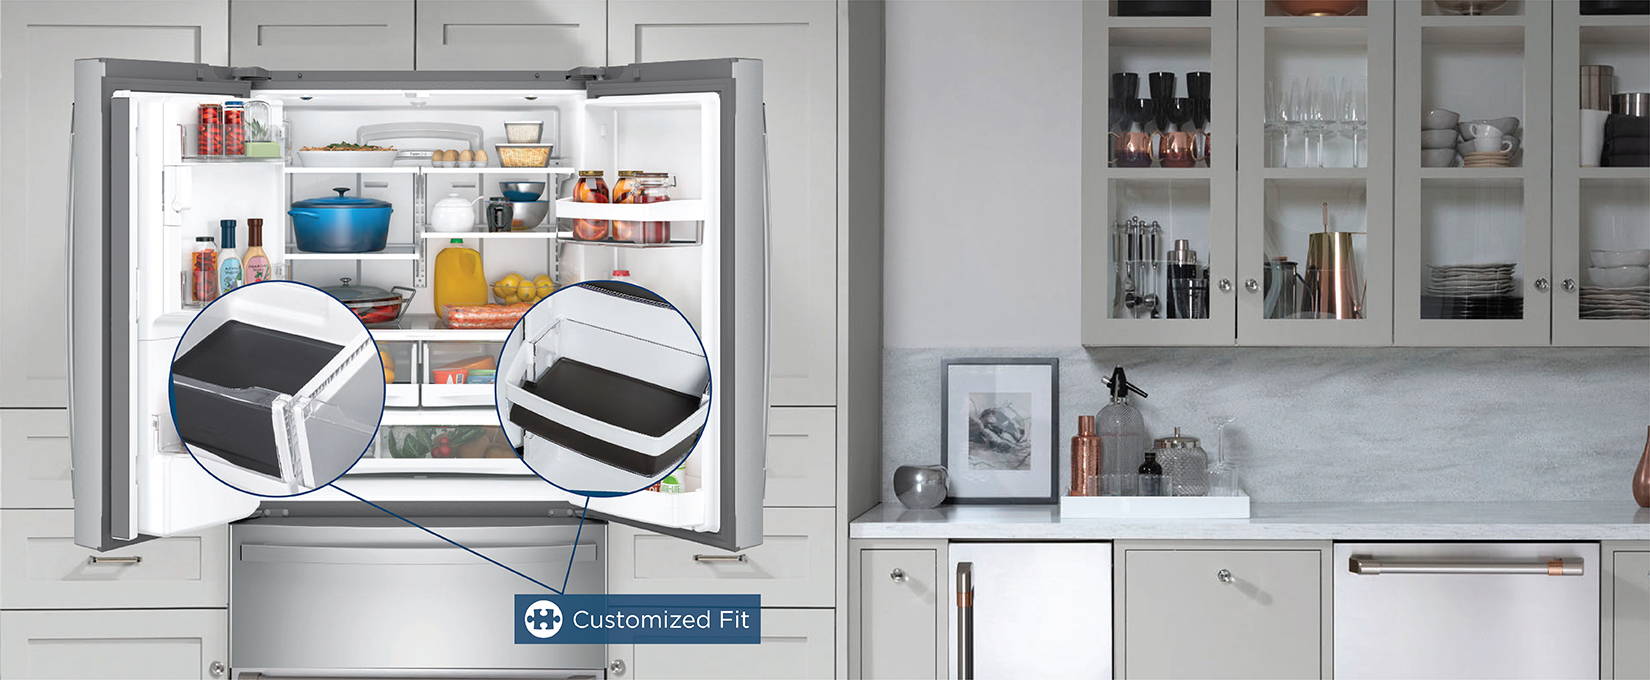 Refrigerator with doors open, featuring inset photos displaying Microban door and drawer liners. 